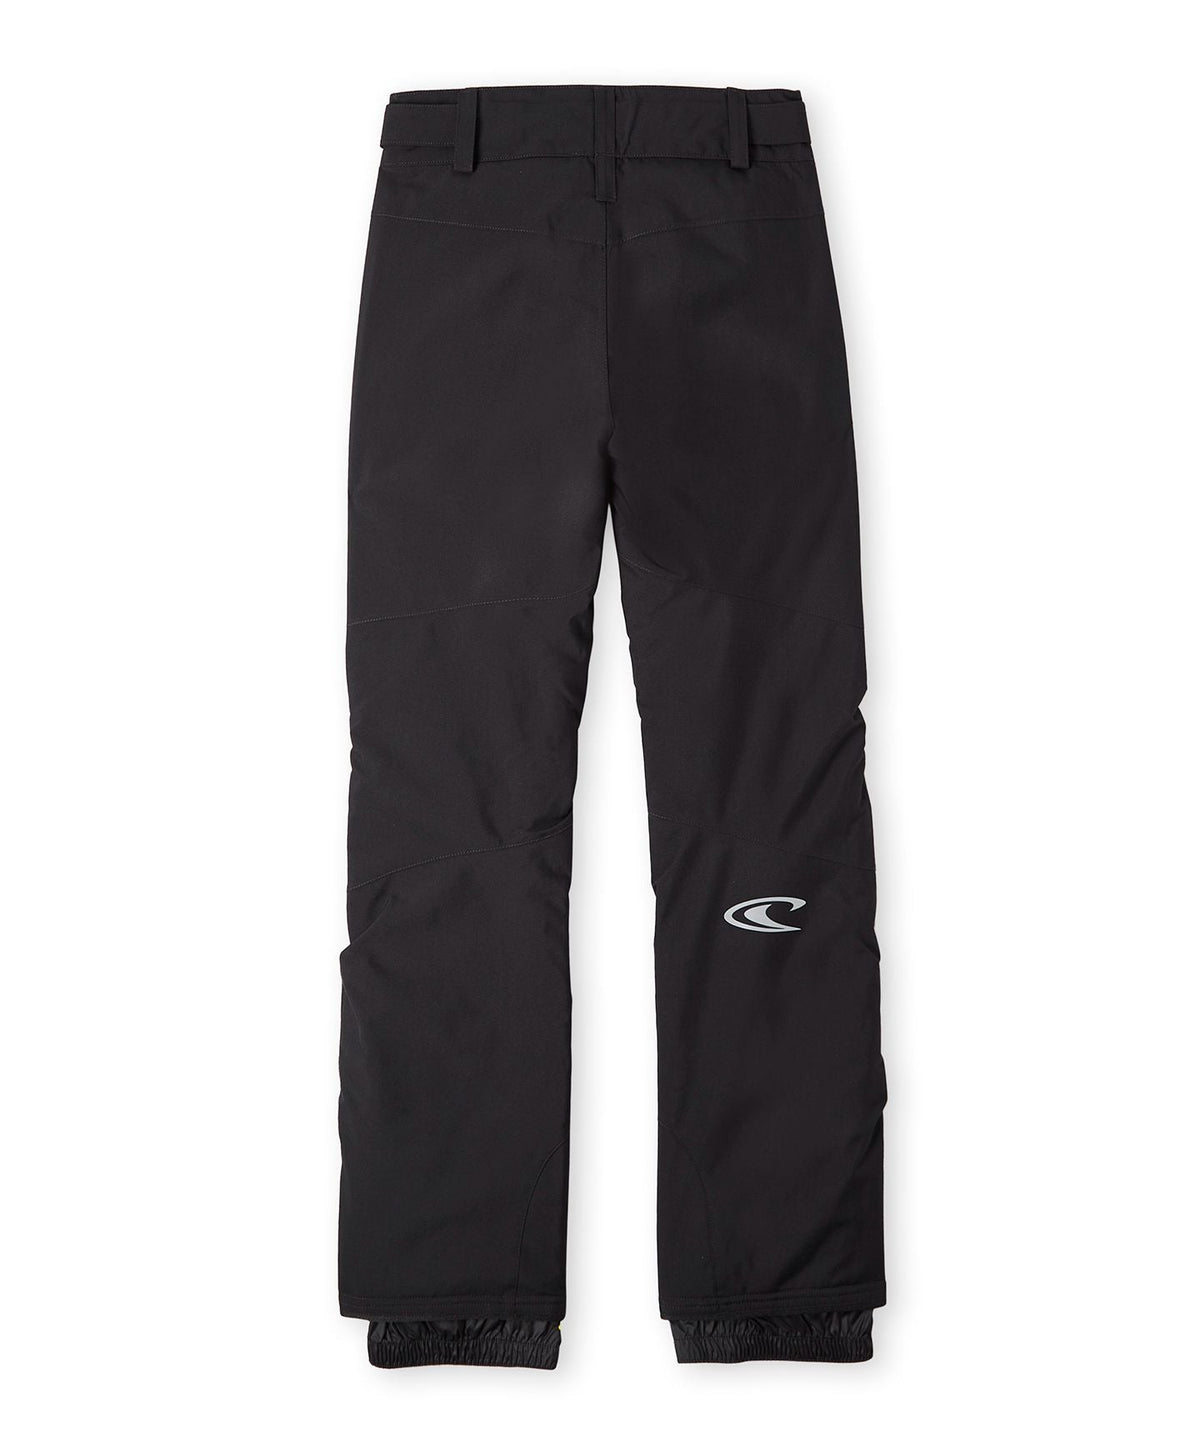 Girl's Star Snow Pants - Black Out